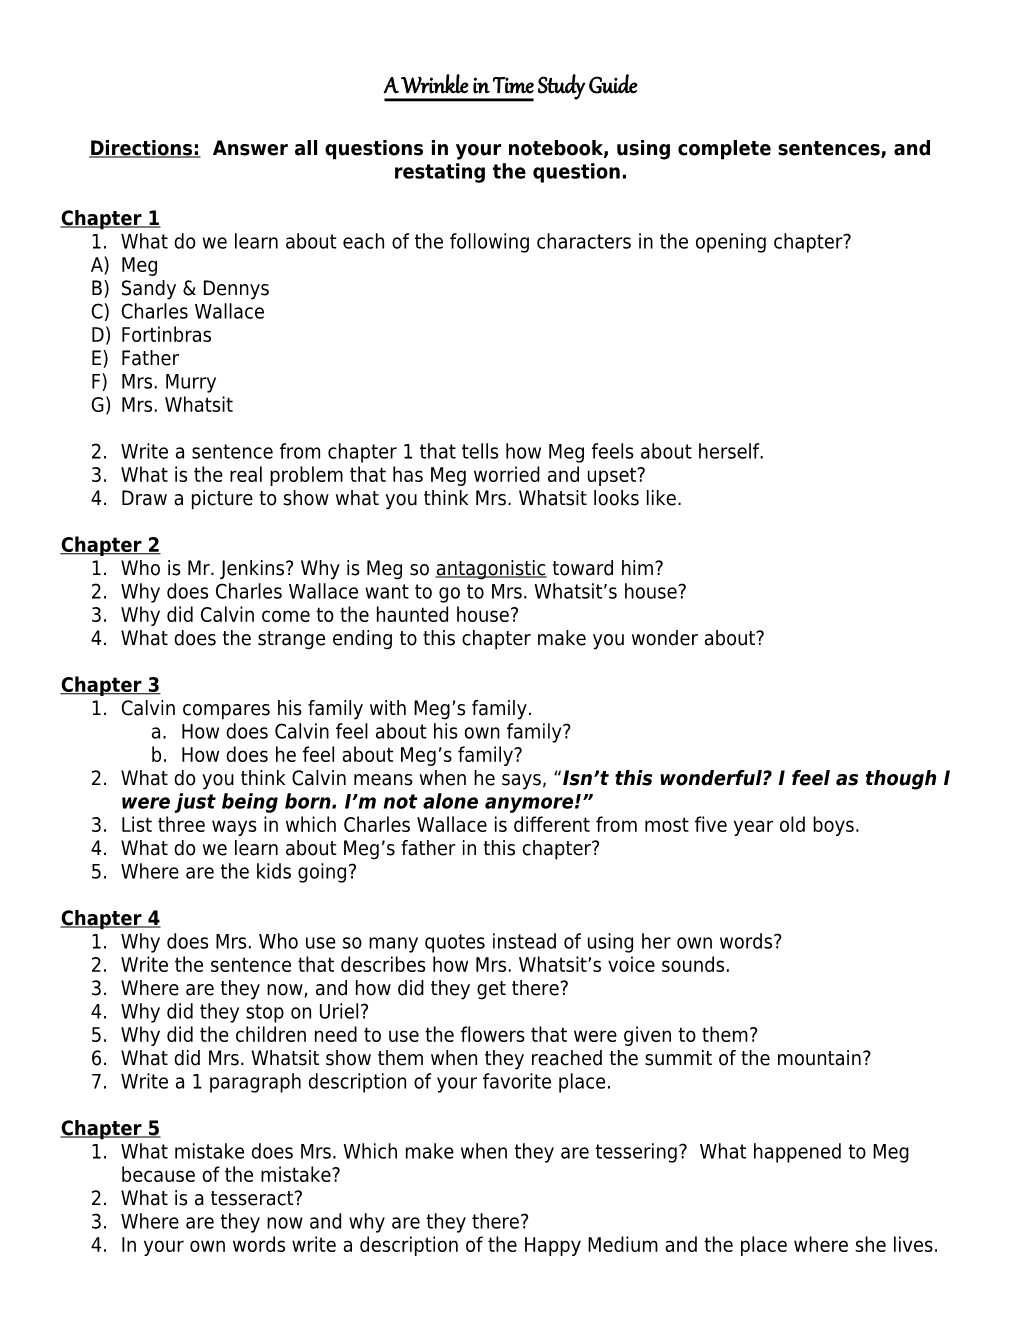 A Wrinkle in Time Study Guide